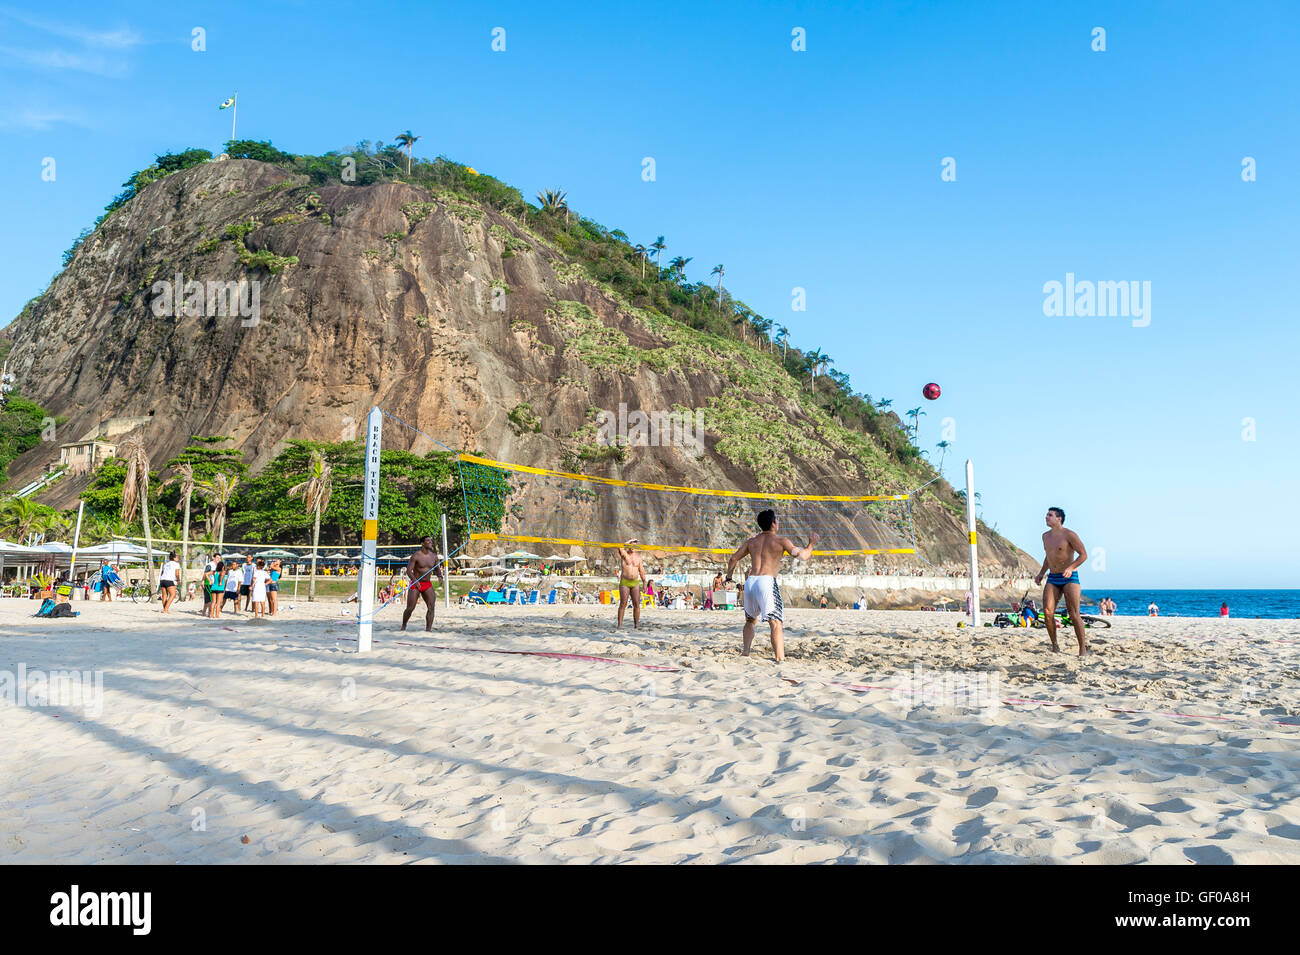 RIO DE JANEIRO - FEBRUARY 10, 2015: Young Brazilian men play a game of footvolley, a sport that combines football and volleyball Stock Photo